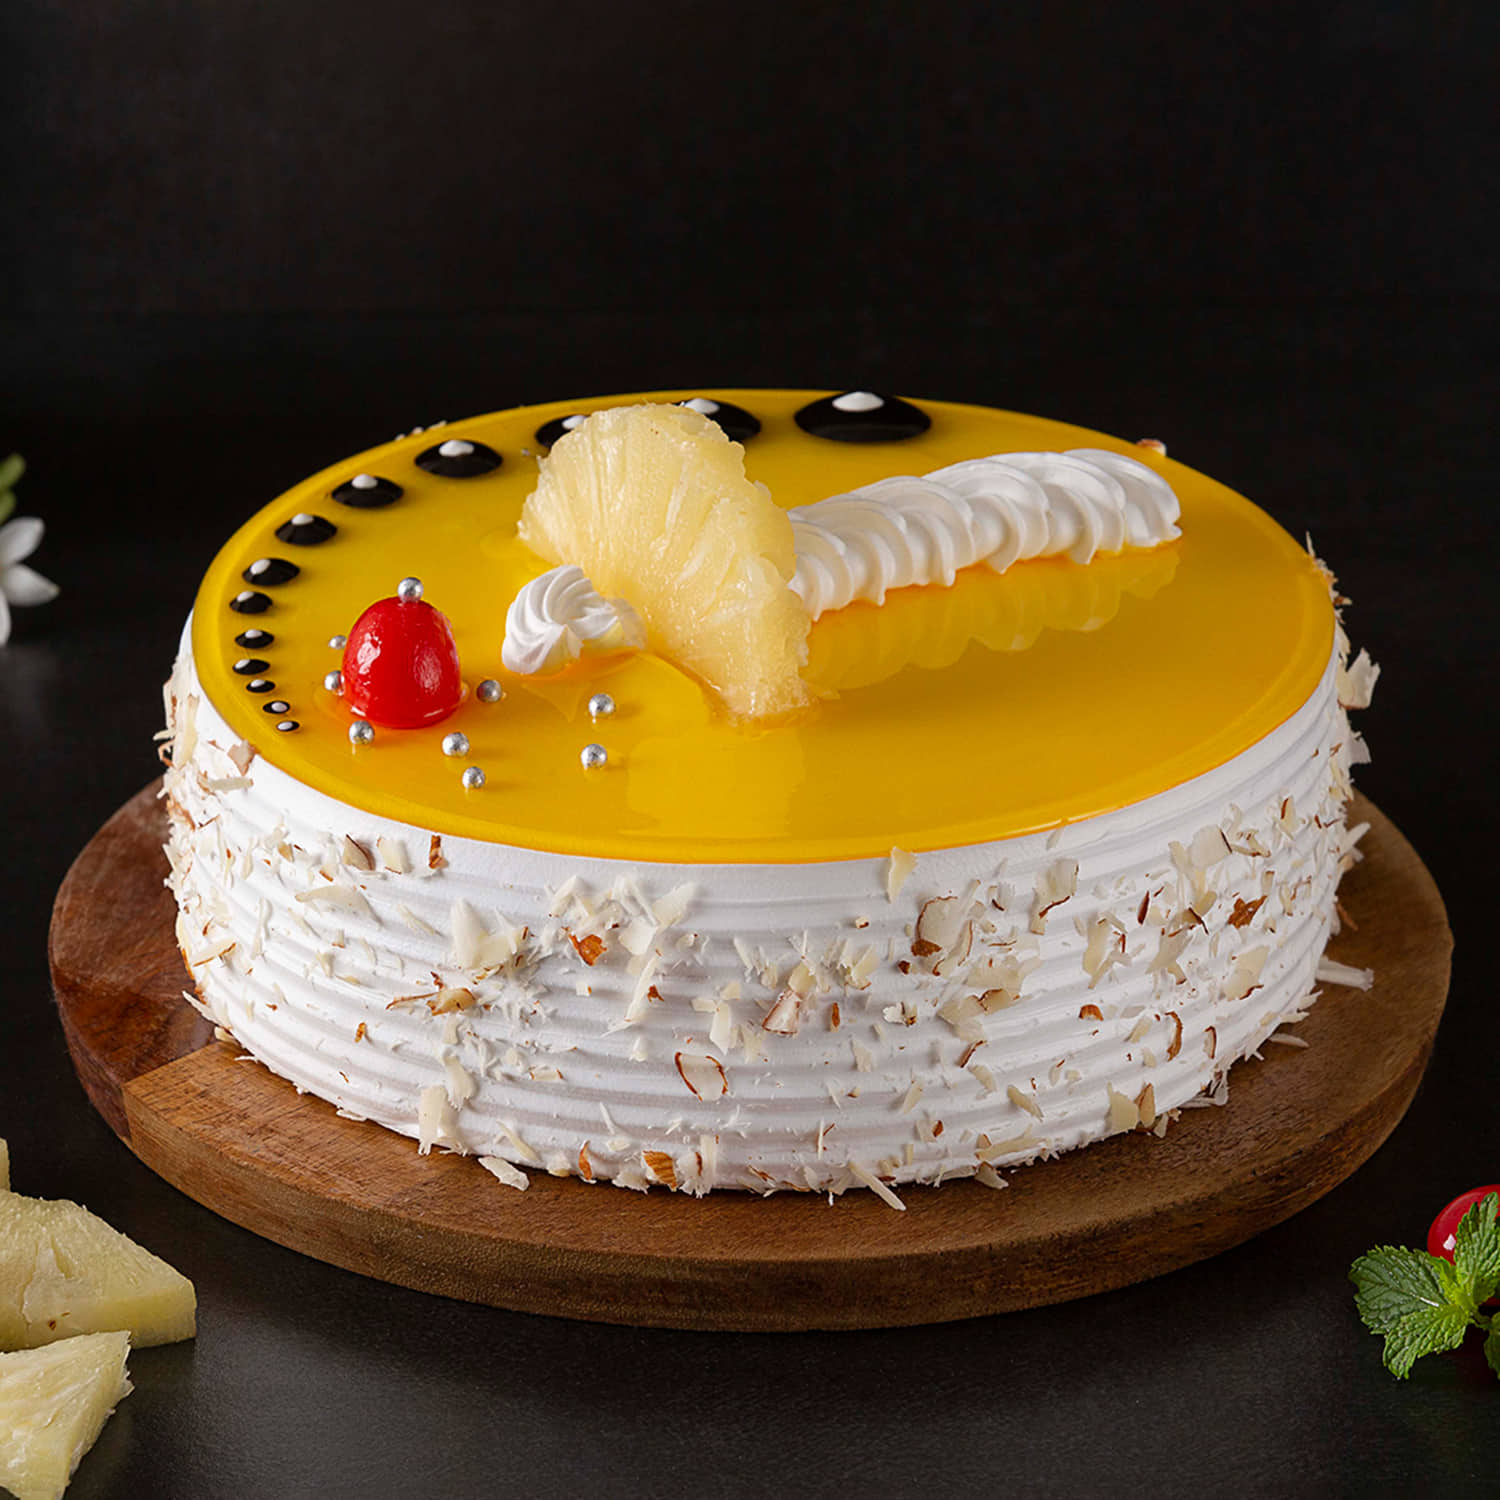 Online Cake Delivery in Udaipur | Midnight Cake Delivery In Udaipur @299 | Online  cake delivery, Creative cake decorating, Cake